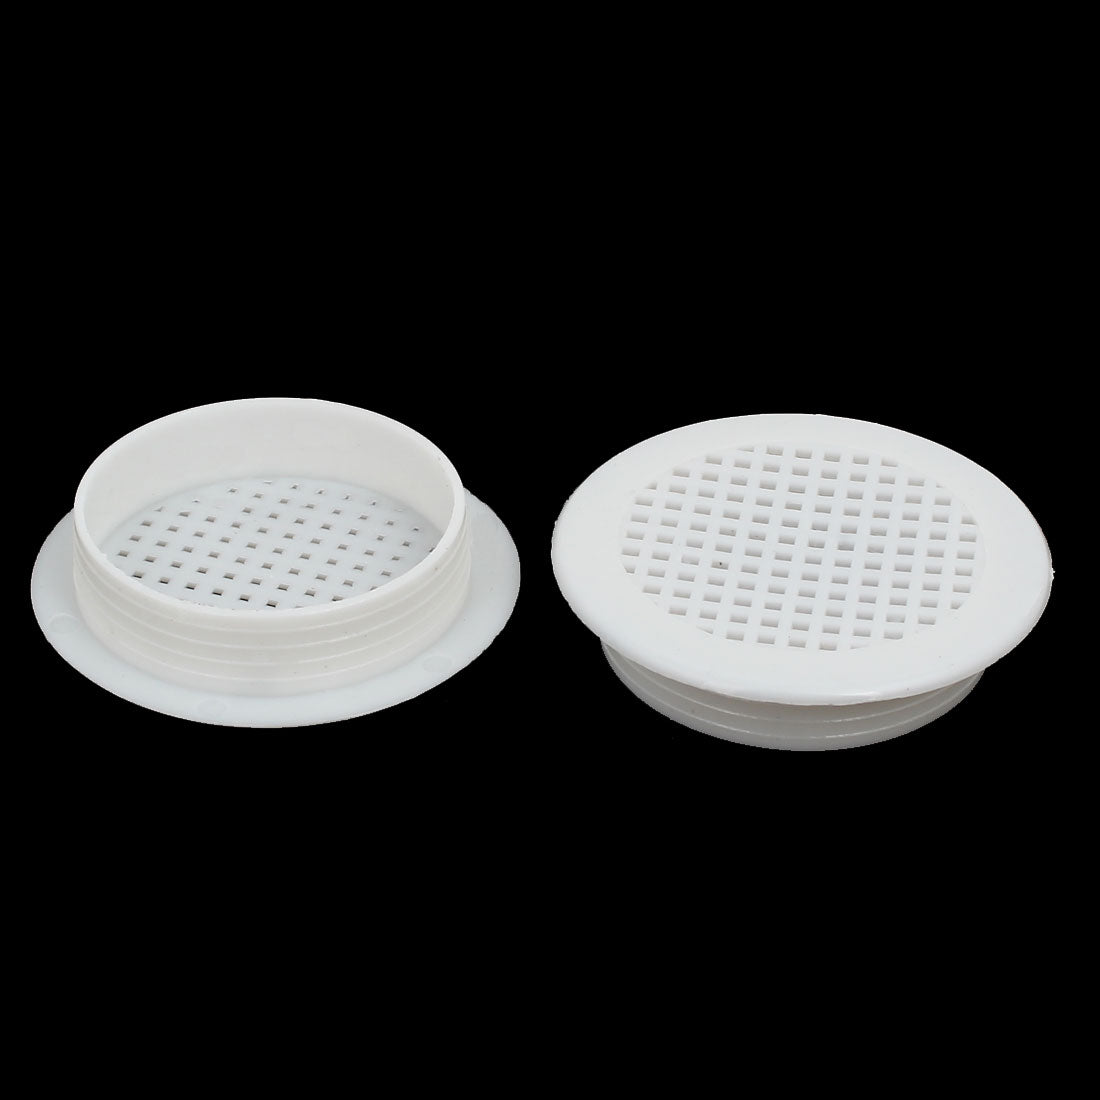 uxcell Uxcell Shoes Cabinet Plastic Square Mesh Hole Air Vent Louver Cover White 53mm 30pcs